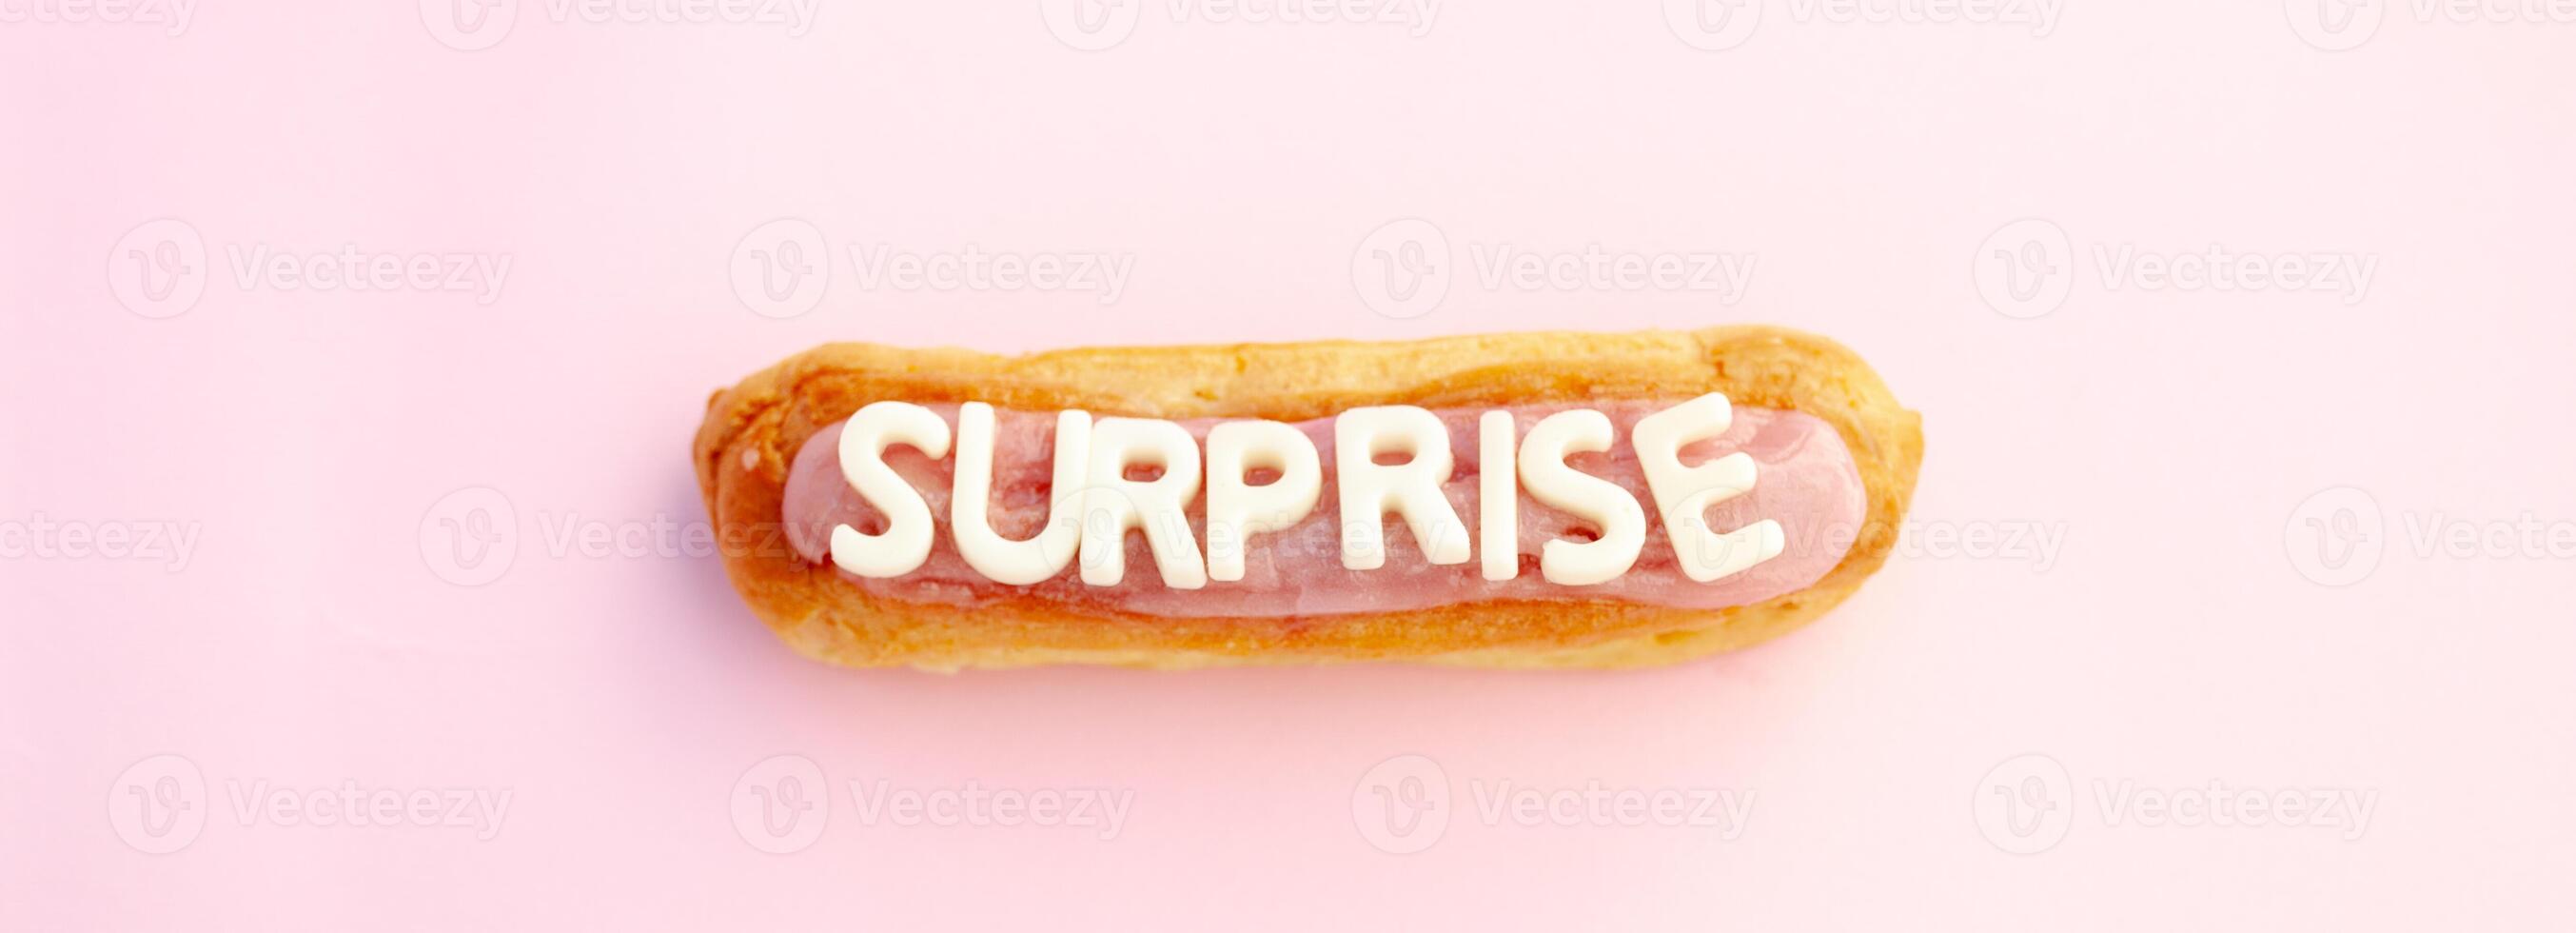 Surprise word written in eclair voluminous white letters on a beautiful pink background. photo